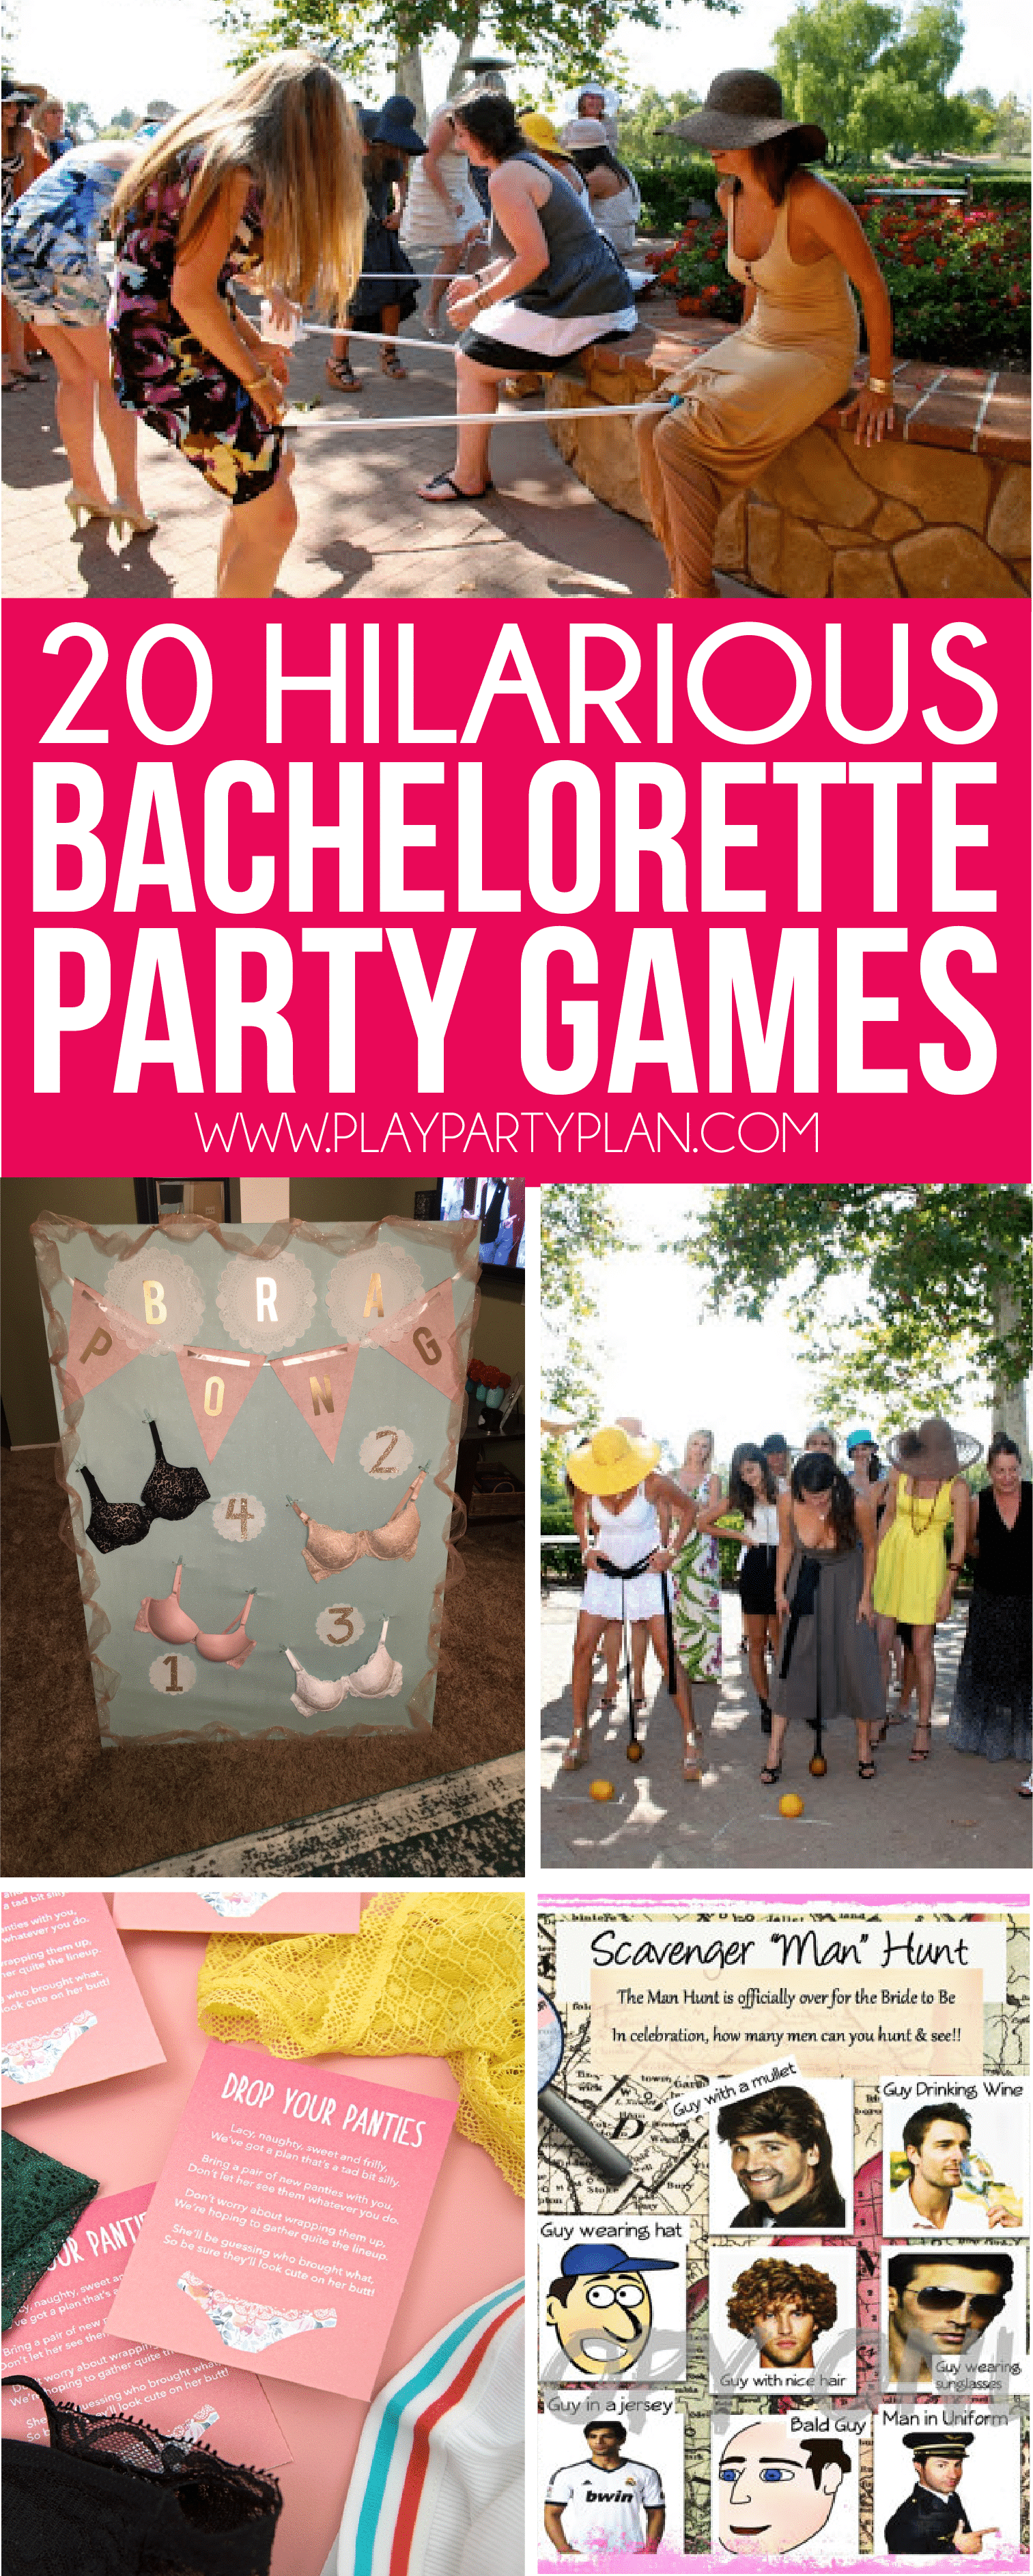 20 Hilarious Bachelorette Party Games Thatll Have You Laughing All Night